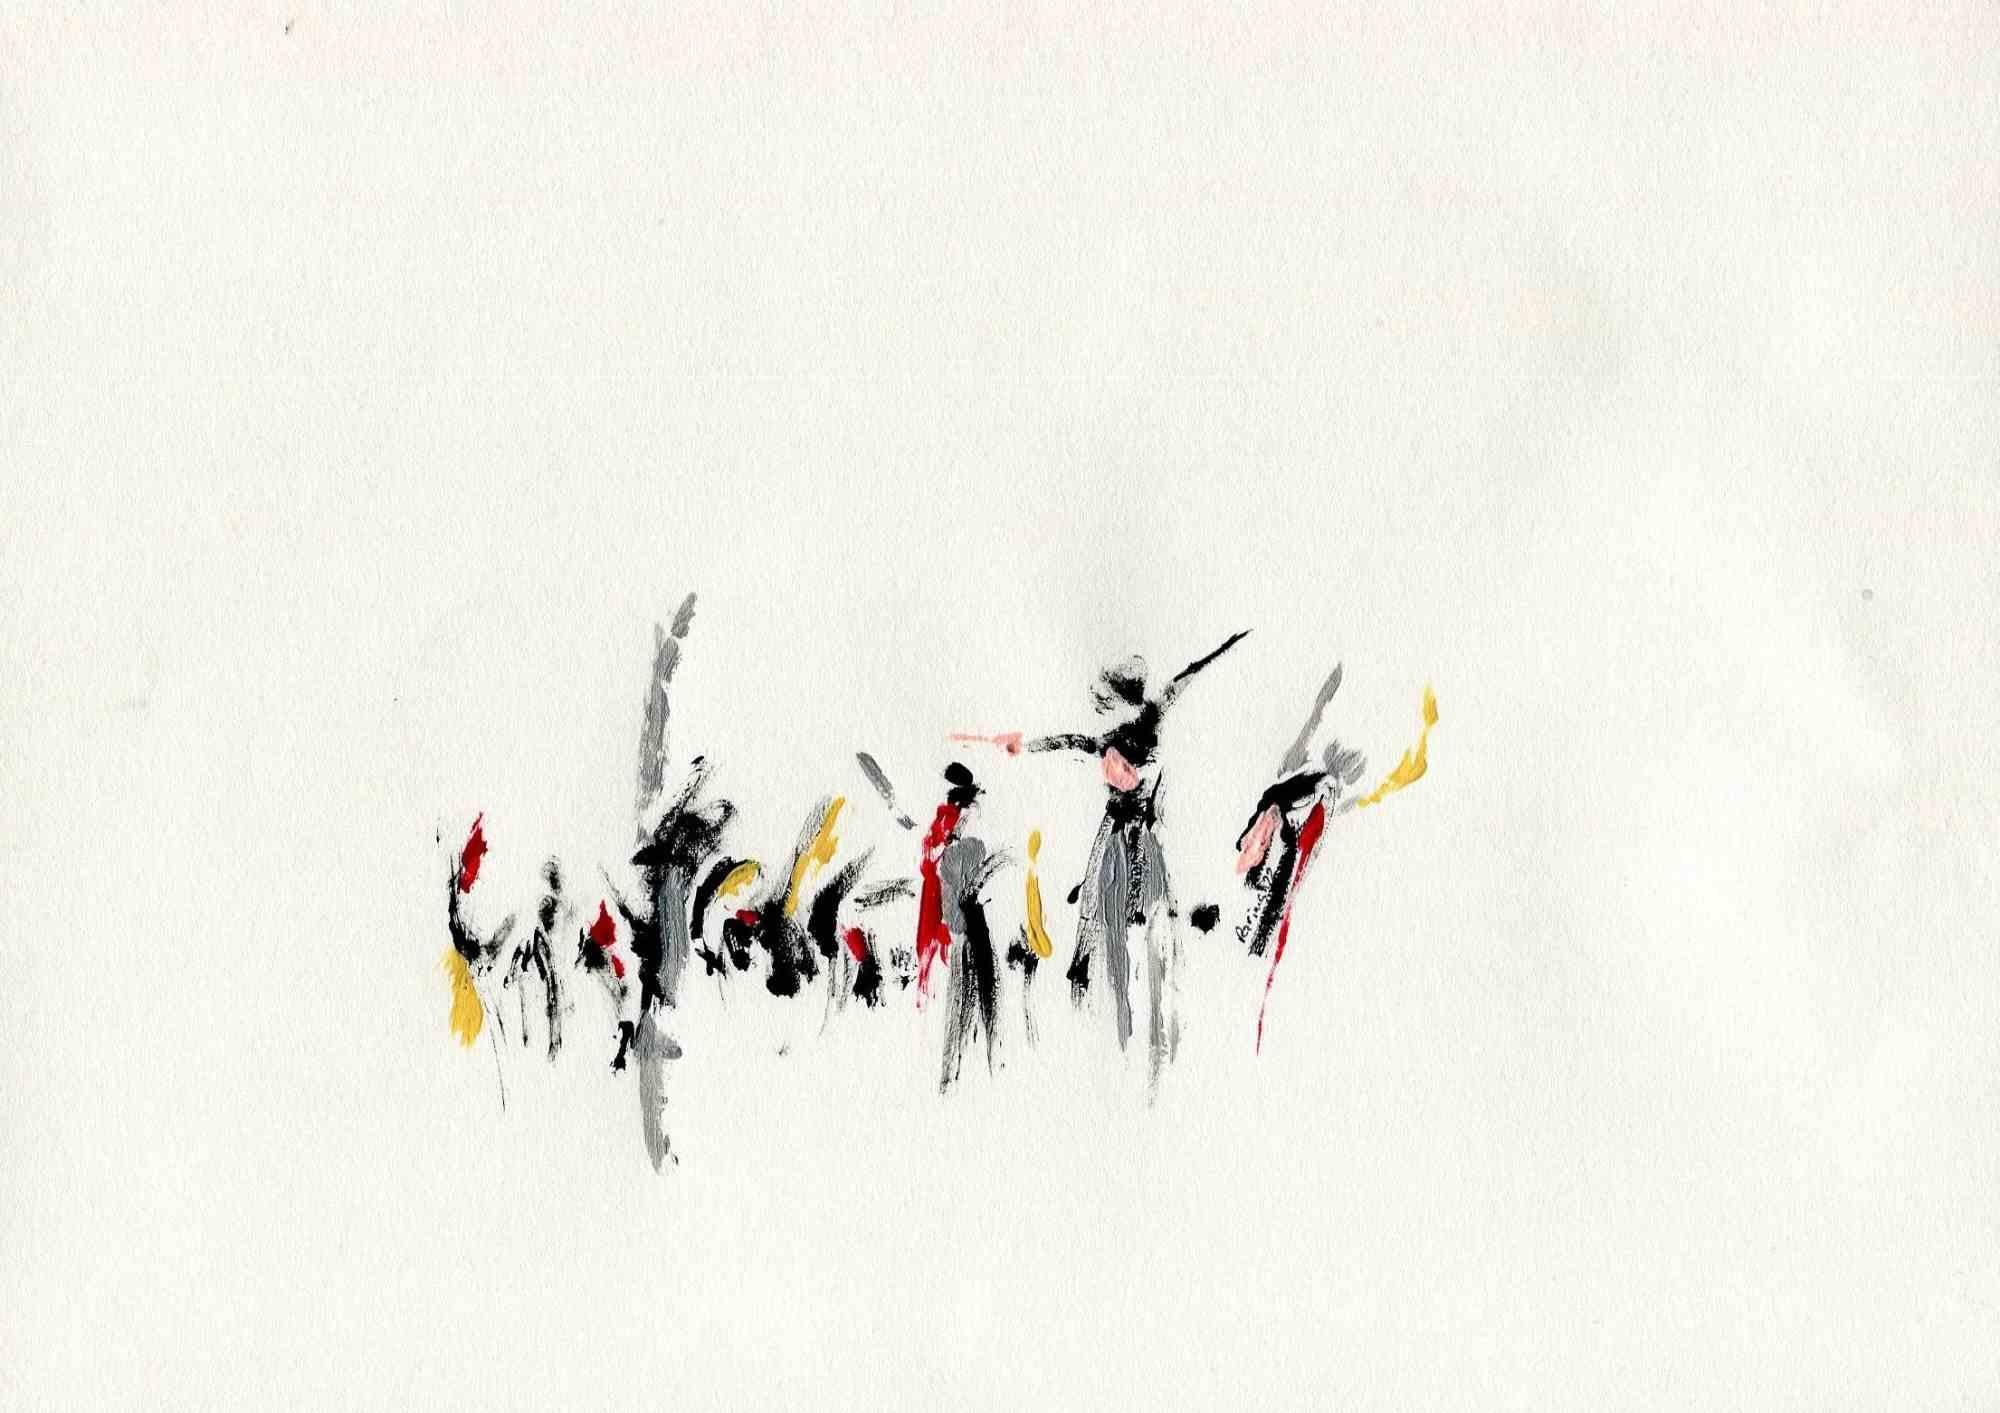 “The song of Freedom” is a painting realised by Iranian Painter and Poet Parimah Avani in 2022.

China ink and acrylic on ivory-colored paper.

Hand-signed and dated.

Excellent conditions.

The artwork is poetically created through expressionistic